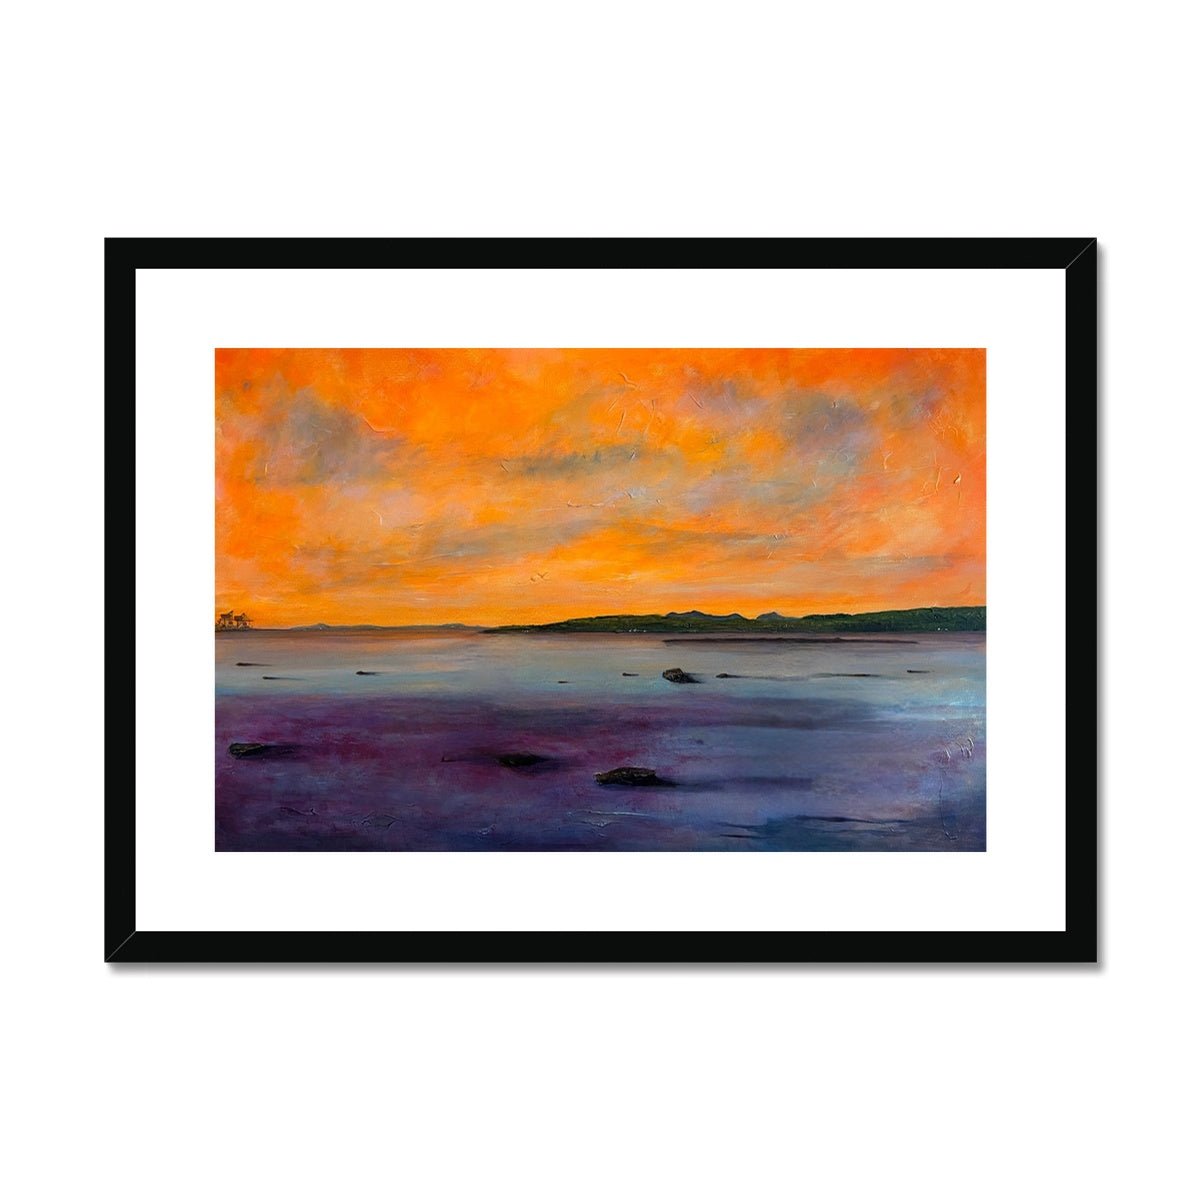 Looking From Largs Painting | Framed & Mounted Prints From Scotland-Framed & Mounted Prints-River Clyde Art Gallery-A2 Landscape-Black Frame-Paintings, Prints, Homeware, Art Gifts From Scotland By Scottish Artist Kevin Hunter